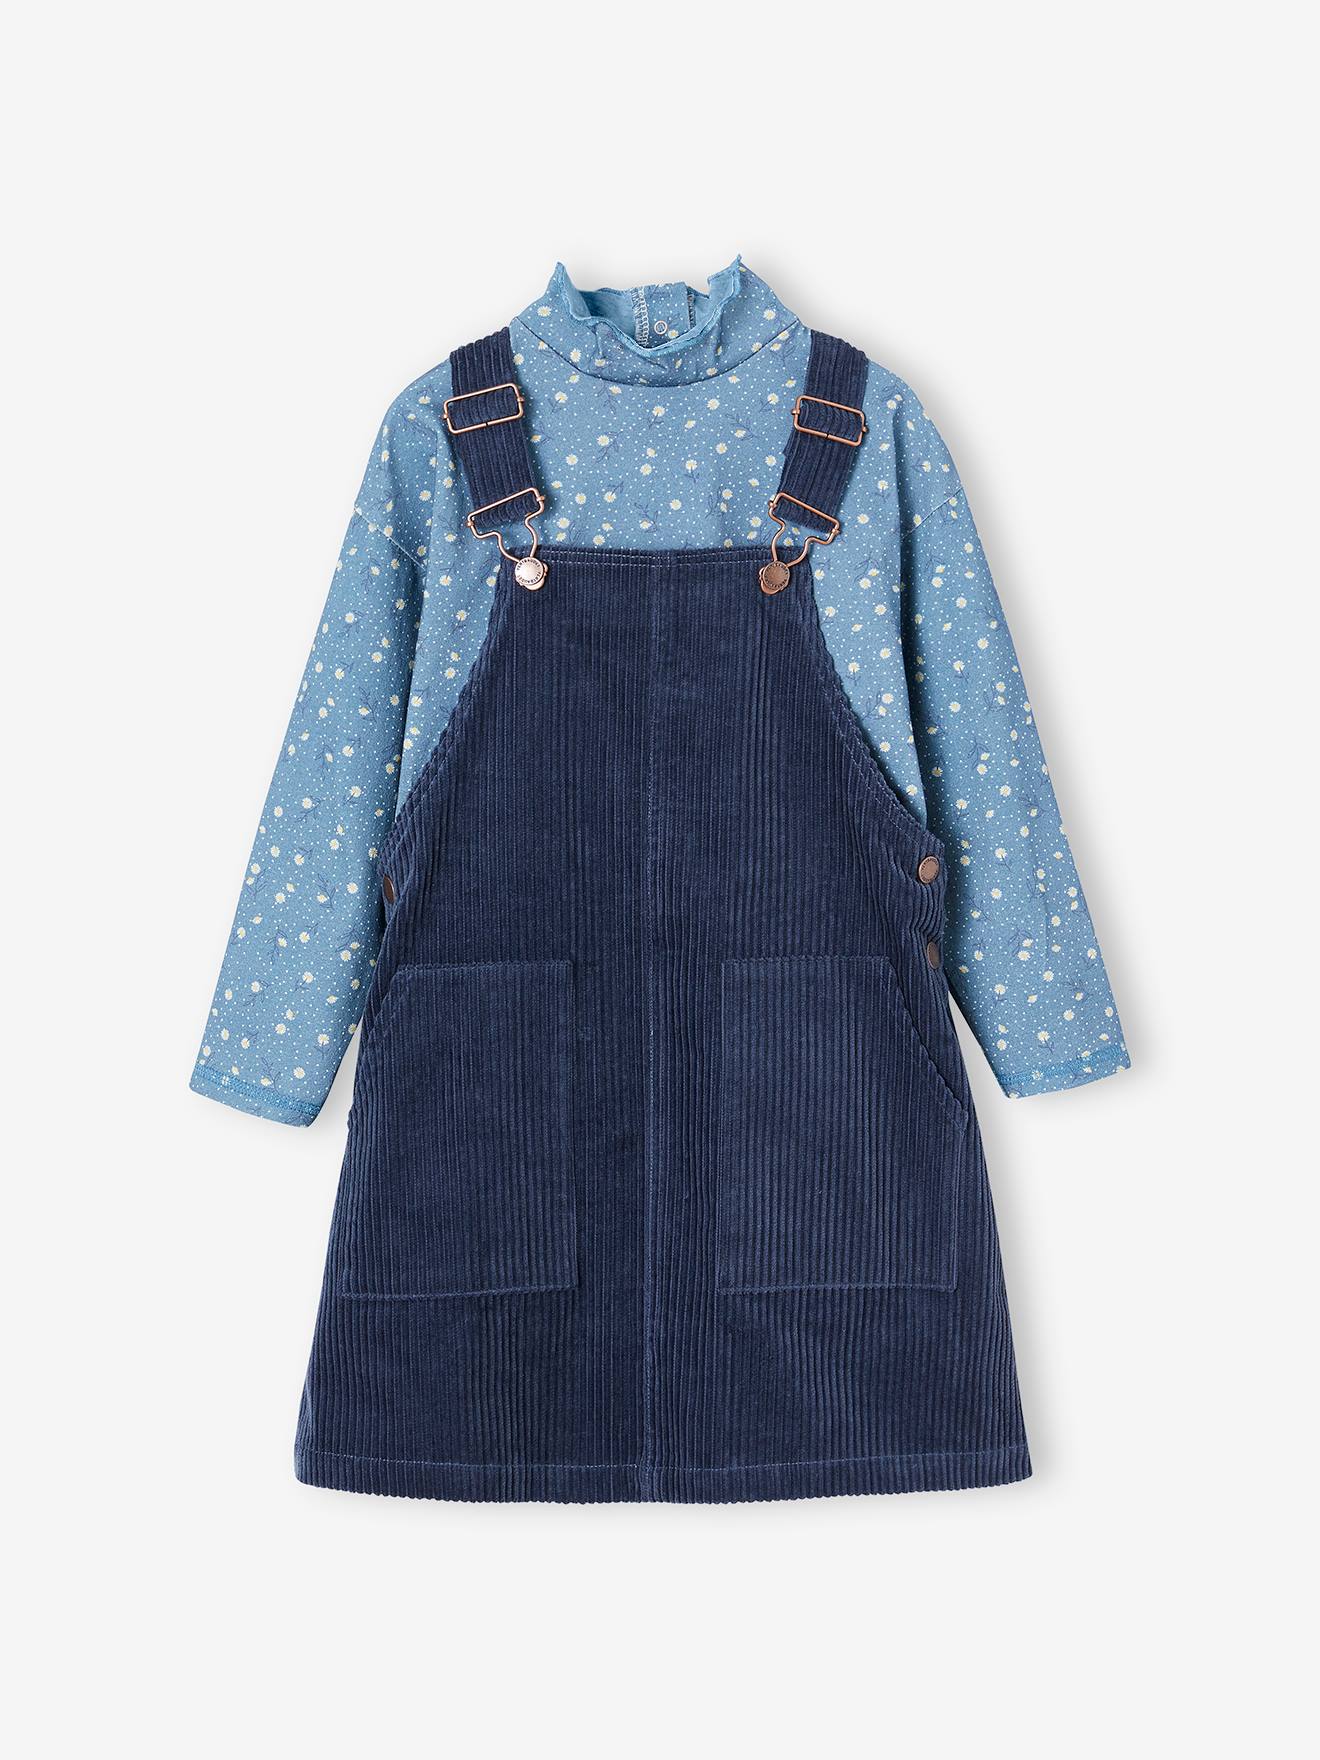 Top + Corduroy Dungaree Dress Outfit for Girls night blue